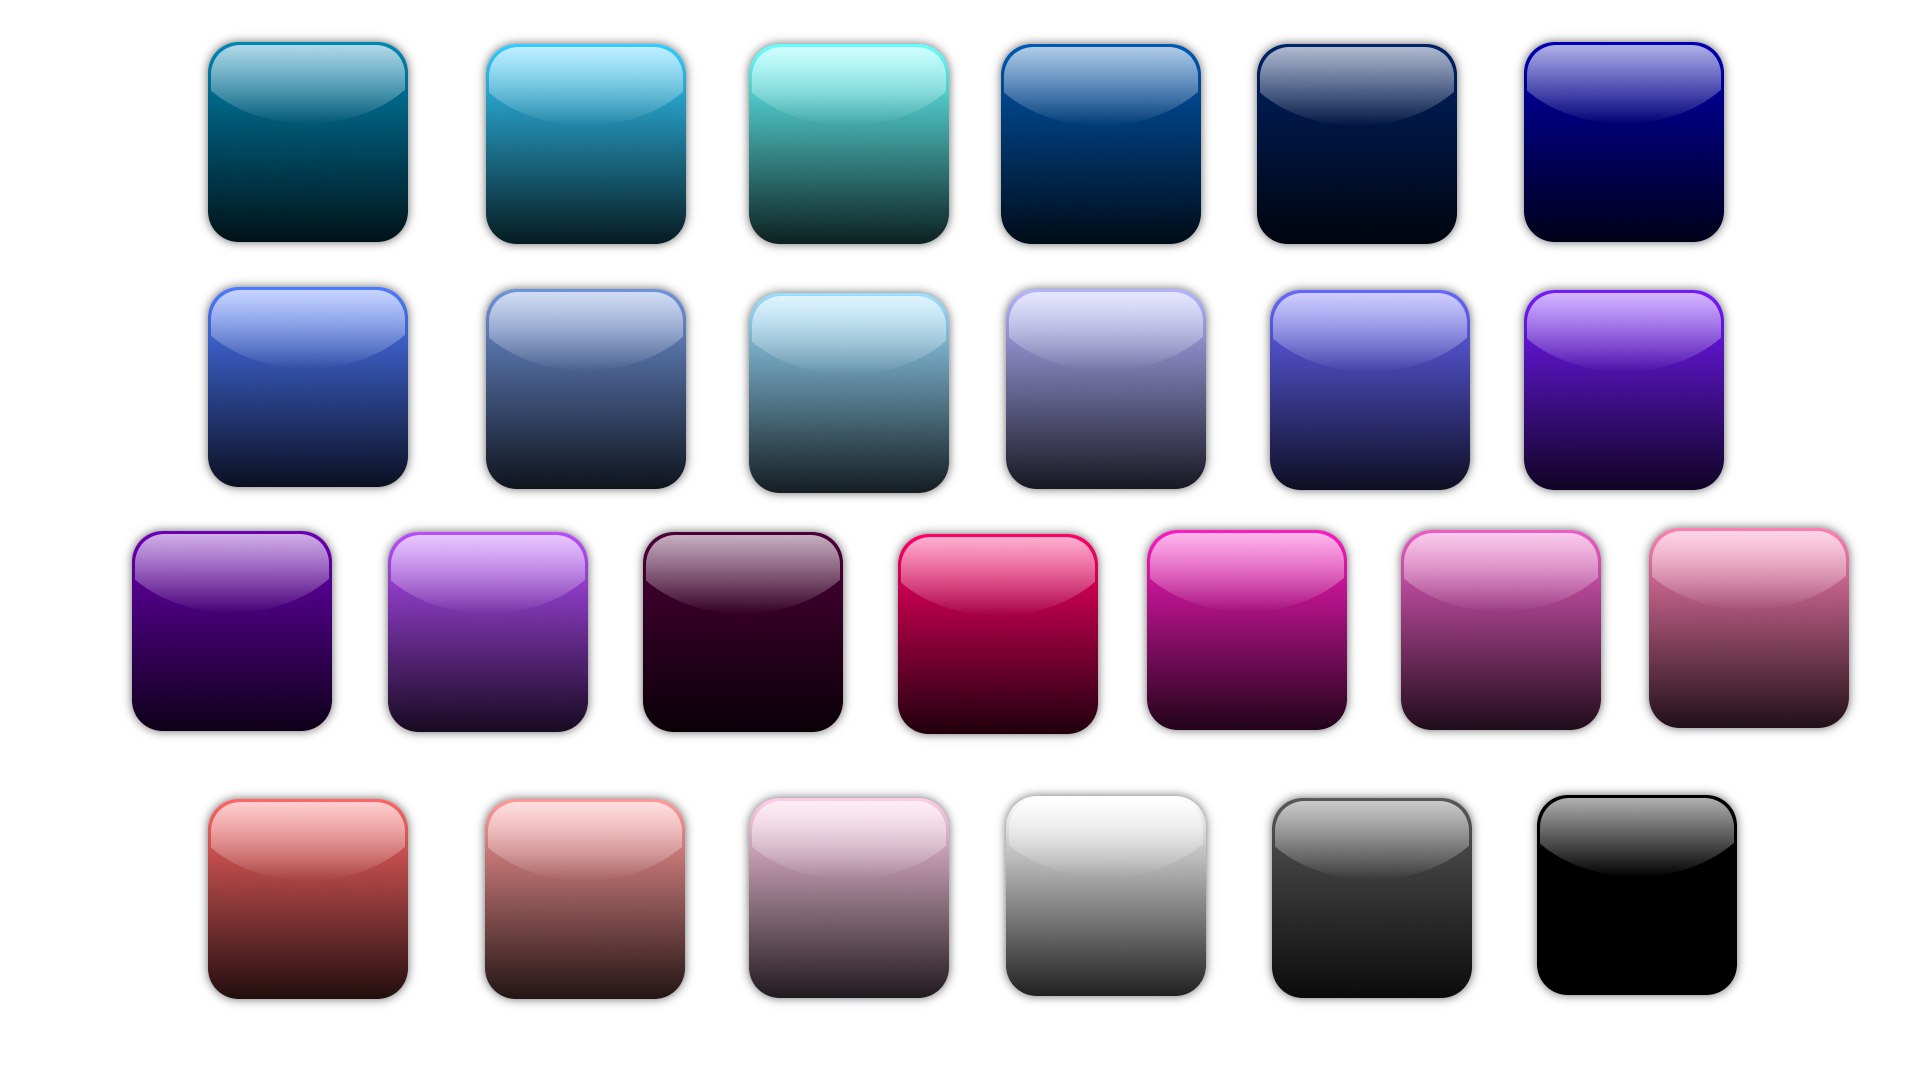 Colored gradient buttons free image download